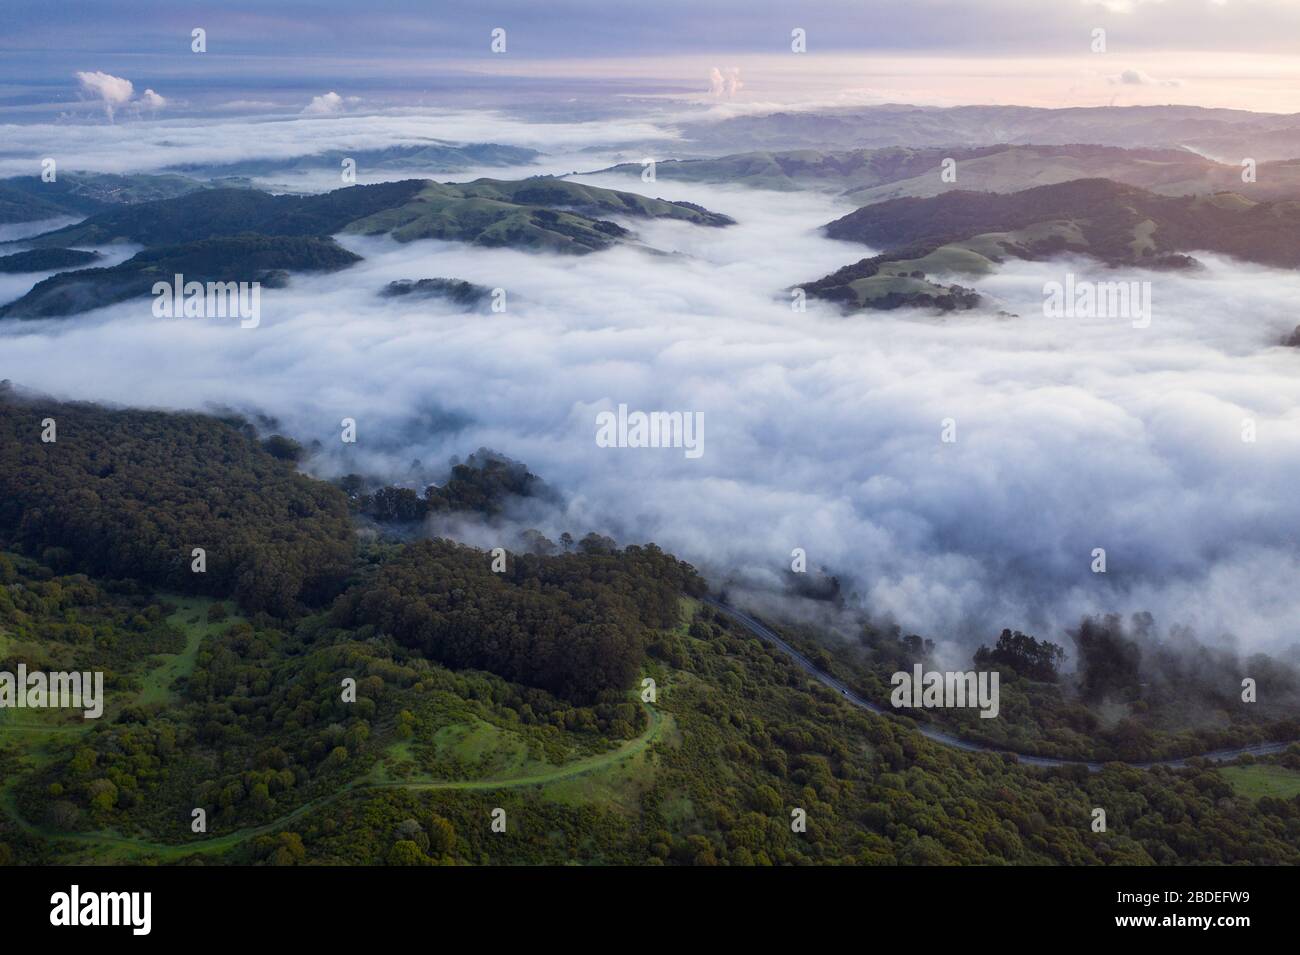 Early morning light illuminates fog as it rolls through valleys in Northern California. Just west of these hills and valleys is San Francisco Bay. Stock Photo